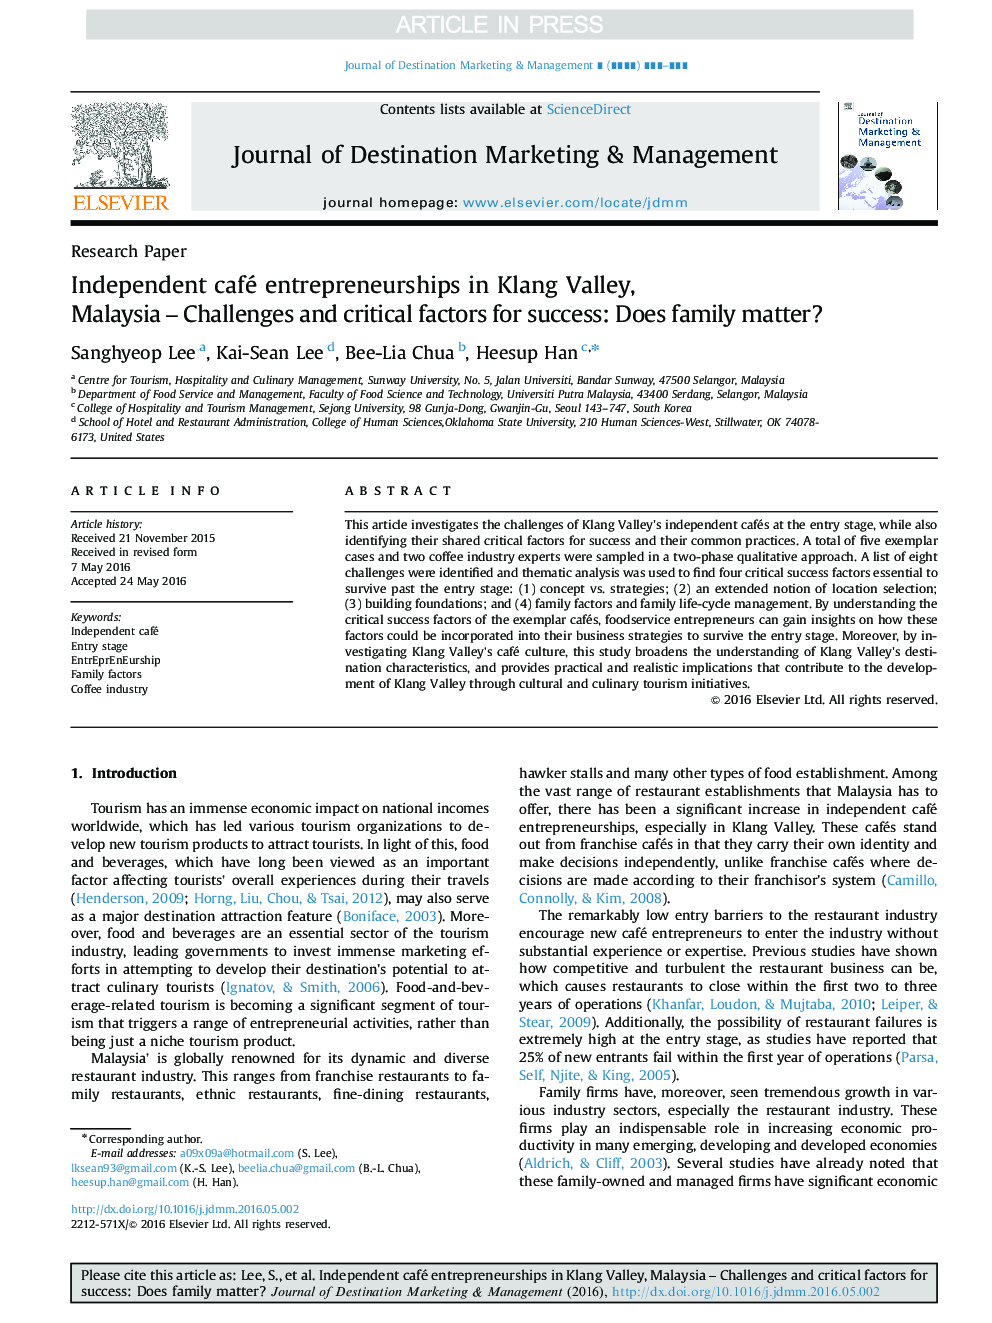 Independent café entrepreneurships in Klang Valley, Malaysia - Challenges and critical factors for success: Does family matter?